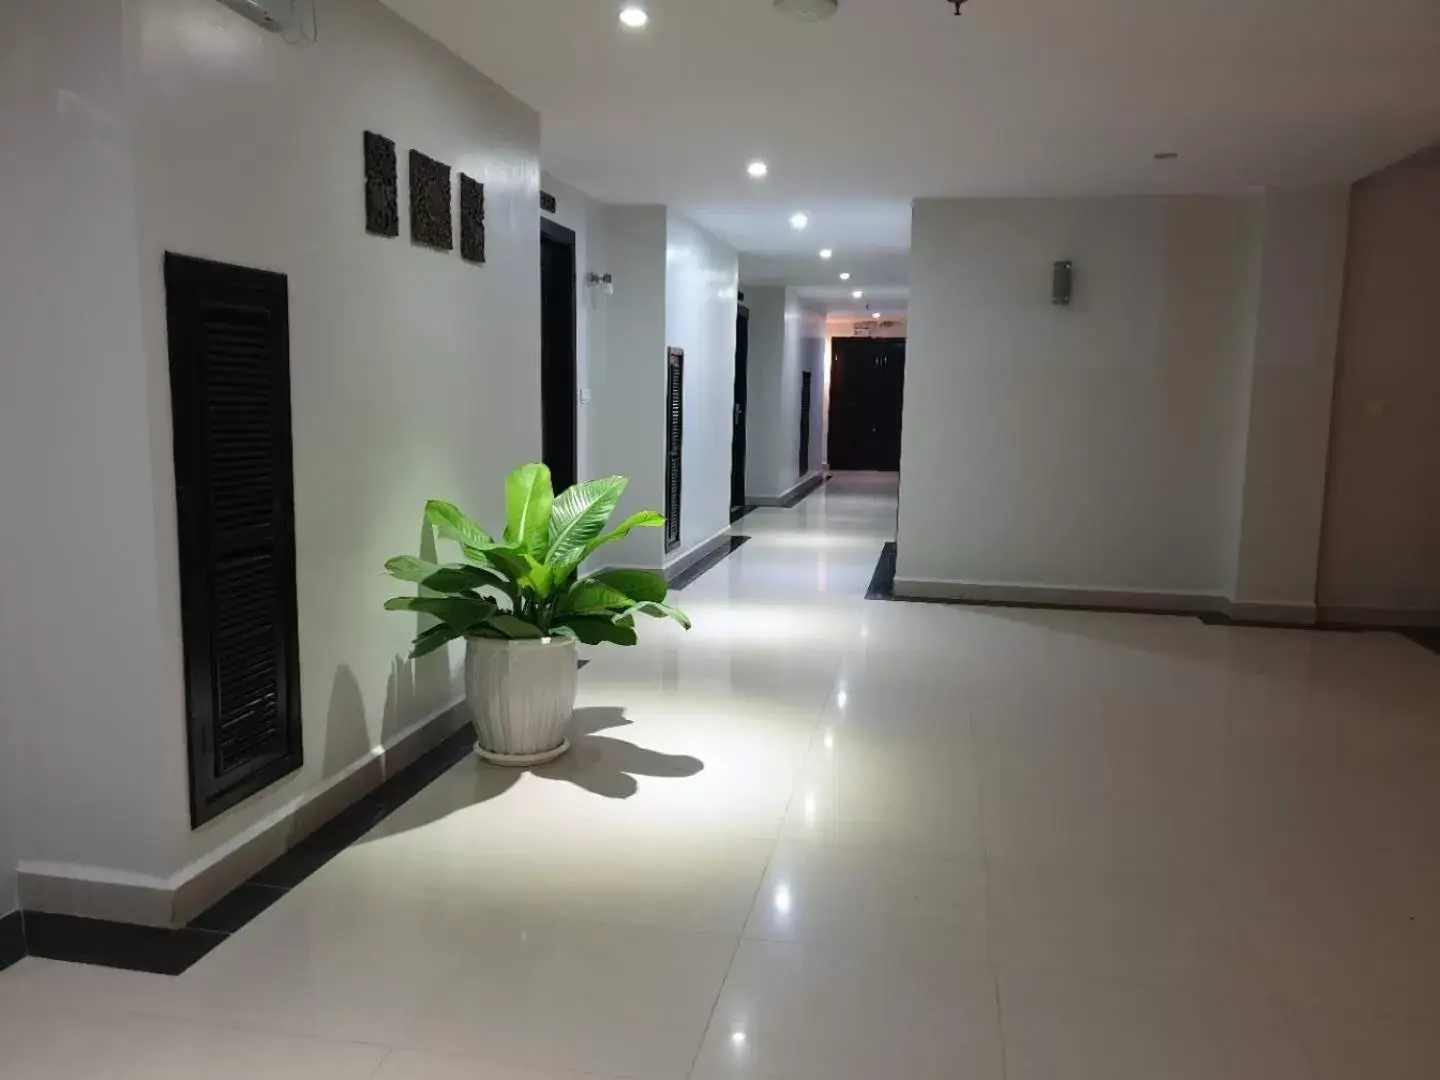 Property building in Aristocrat Residence & Hotel